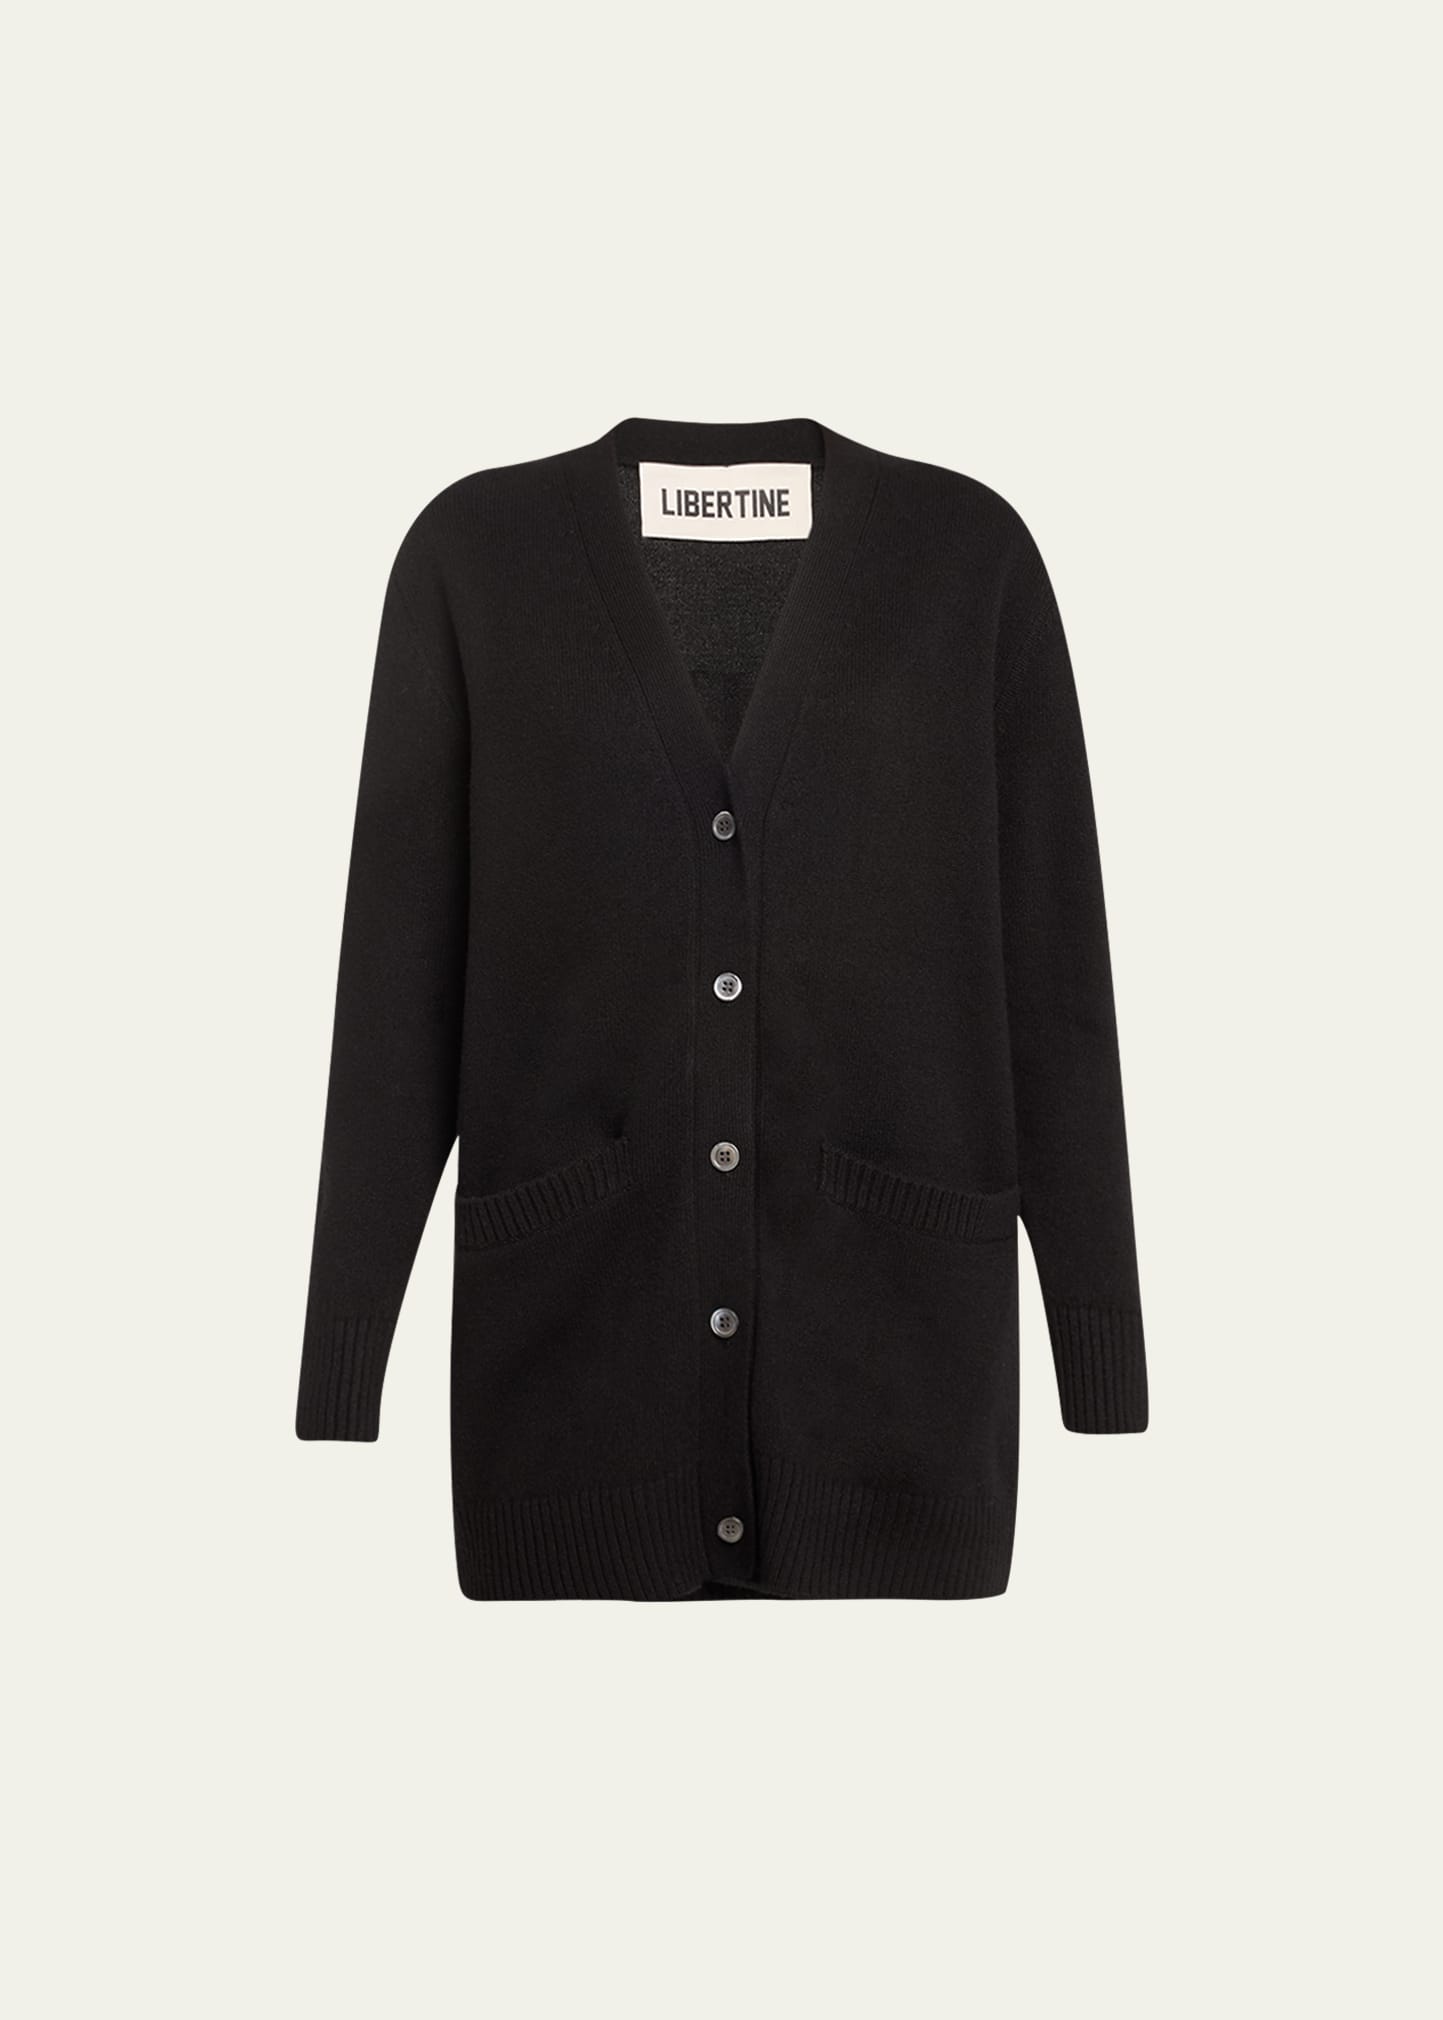 Libertine Paint Travel Learn Oversized Cashmere Cardigan In Black